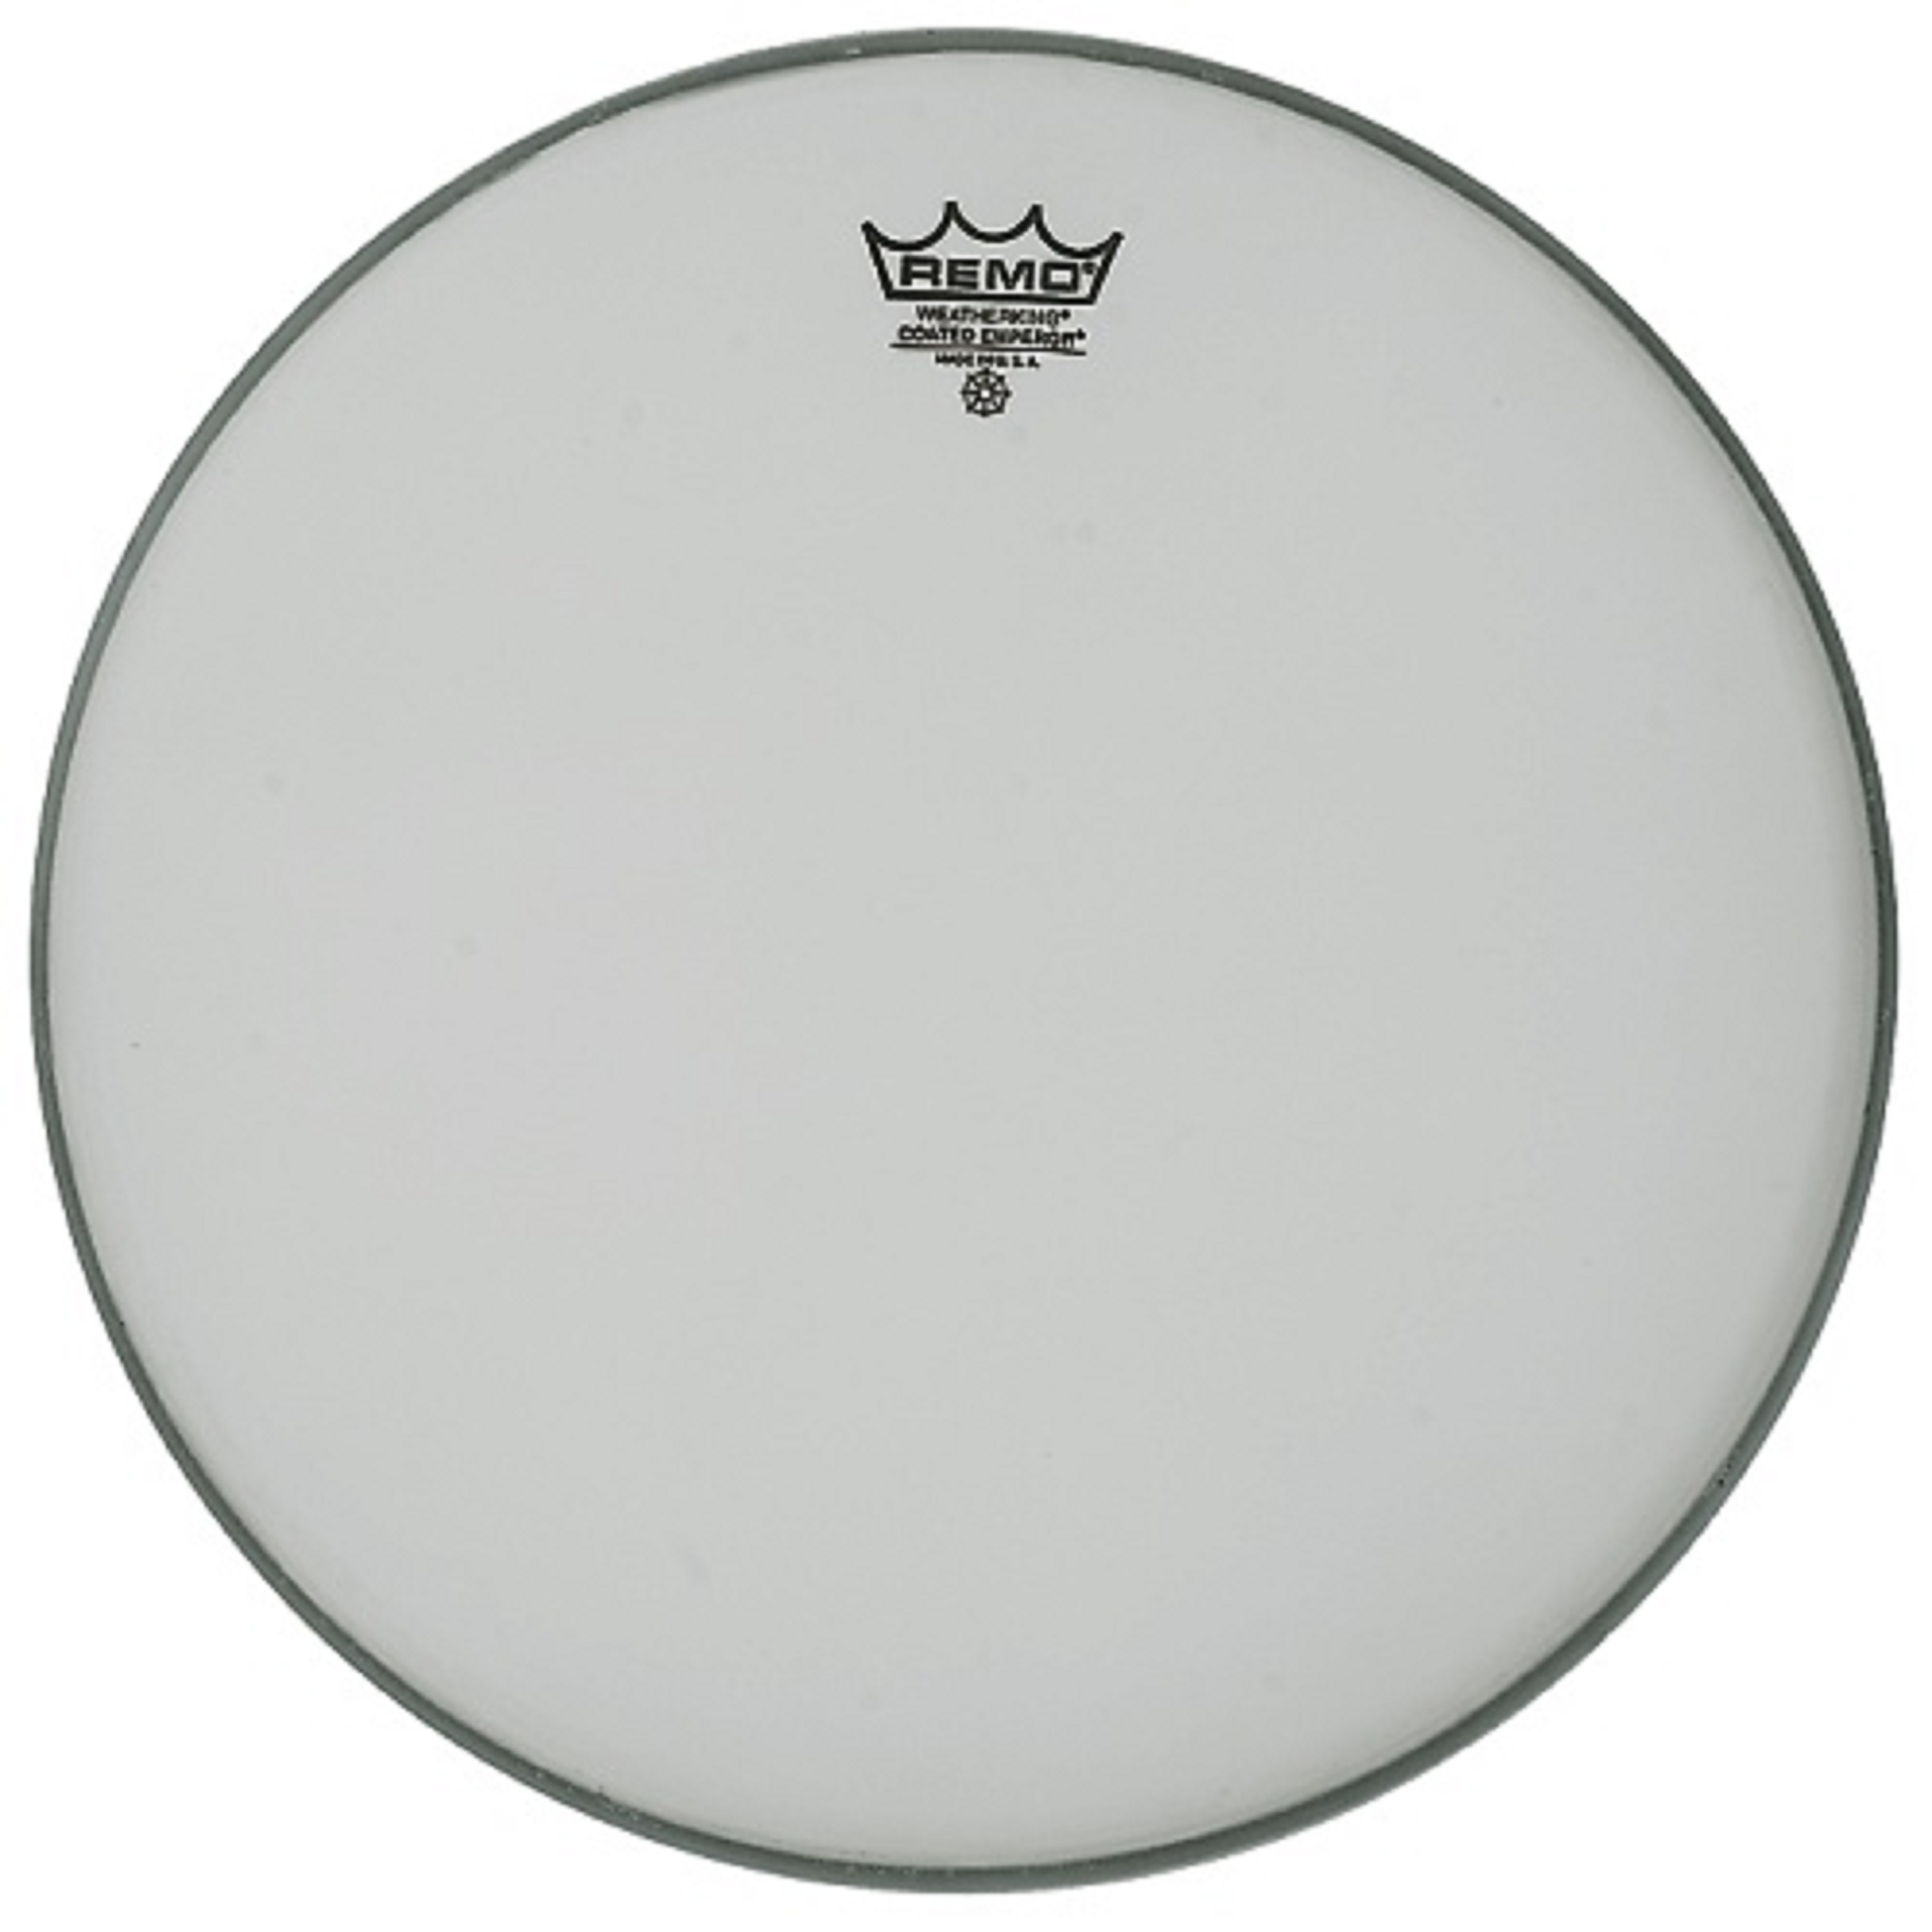 Remo Fell Emperor 13" Coated